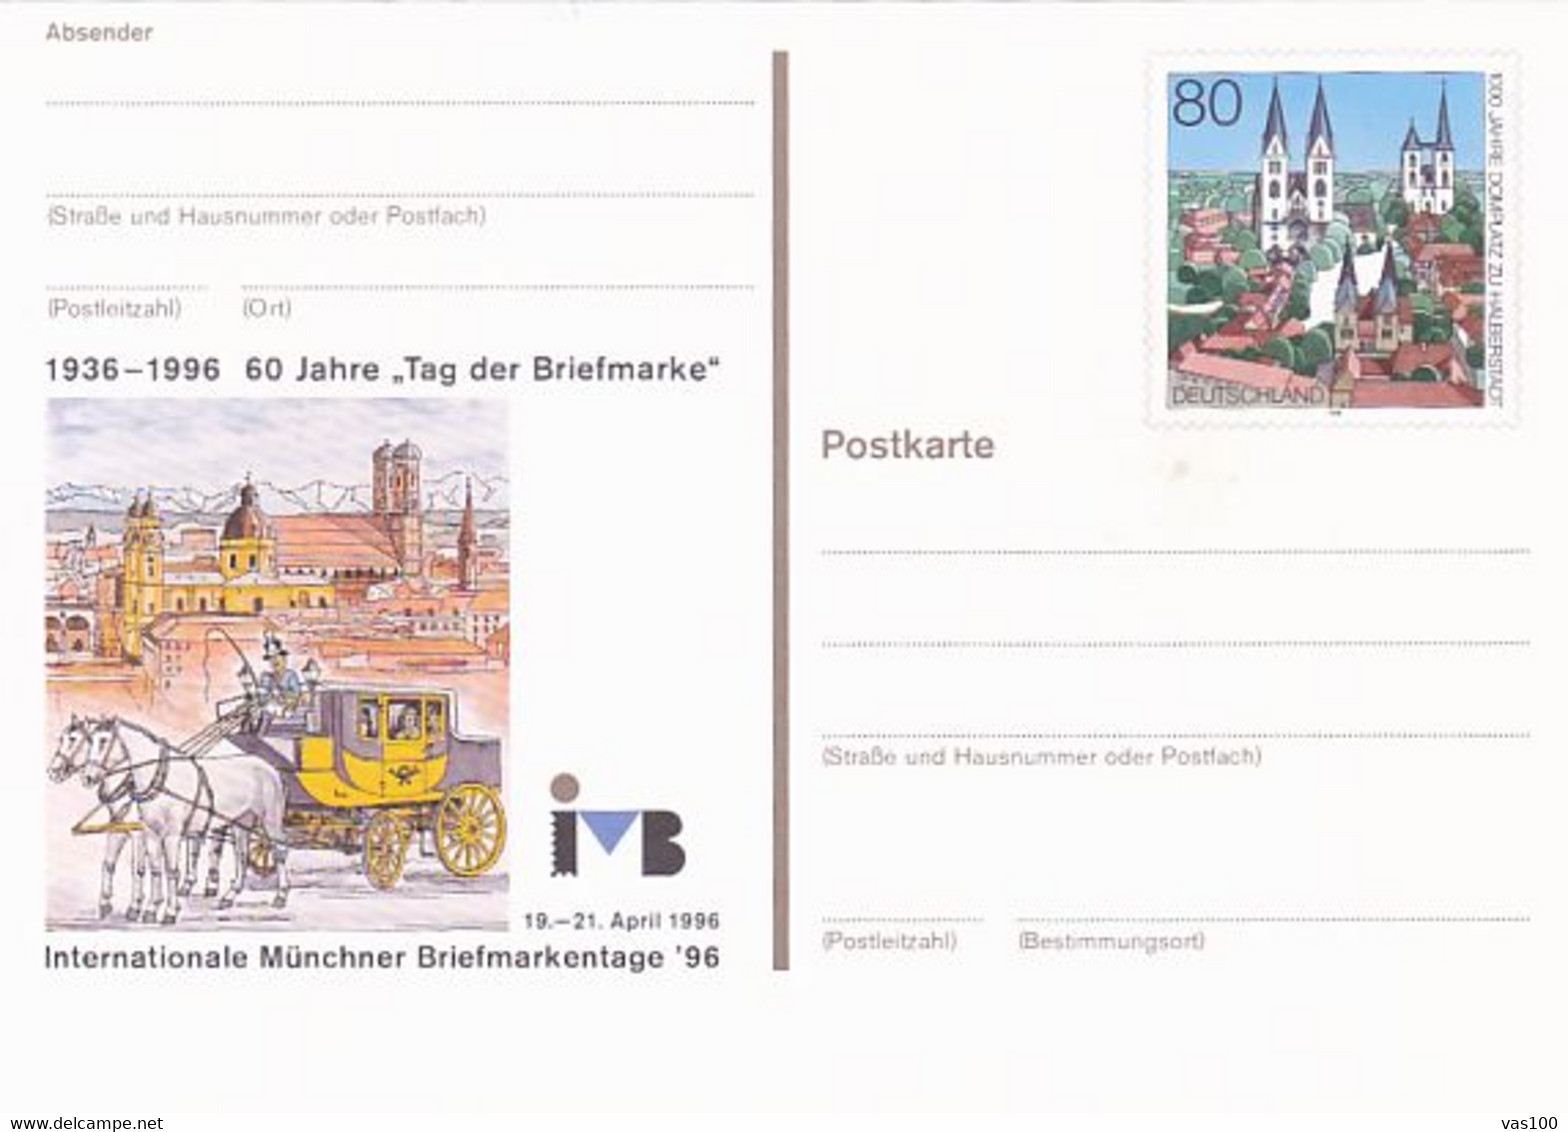 MUNCHEN PHILATELIC EXHIBITION, POST CHASE, HALBERSTADT CATHEDRAL, PC STATIONERY, ENTIER POSTAL, 1996, GERMANY - Postcards - Mint